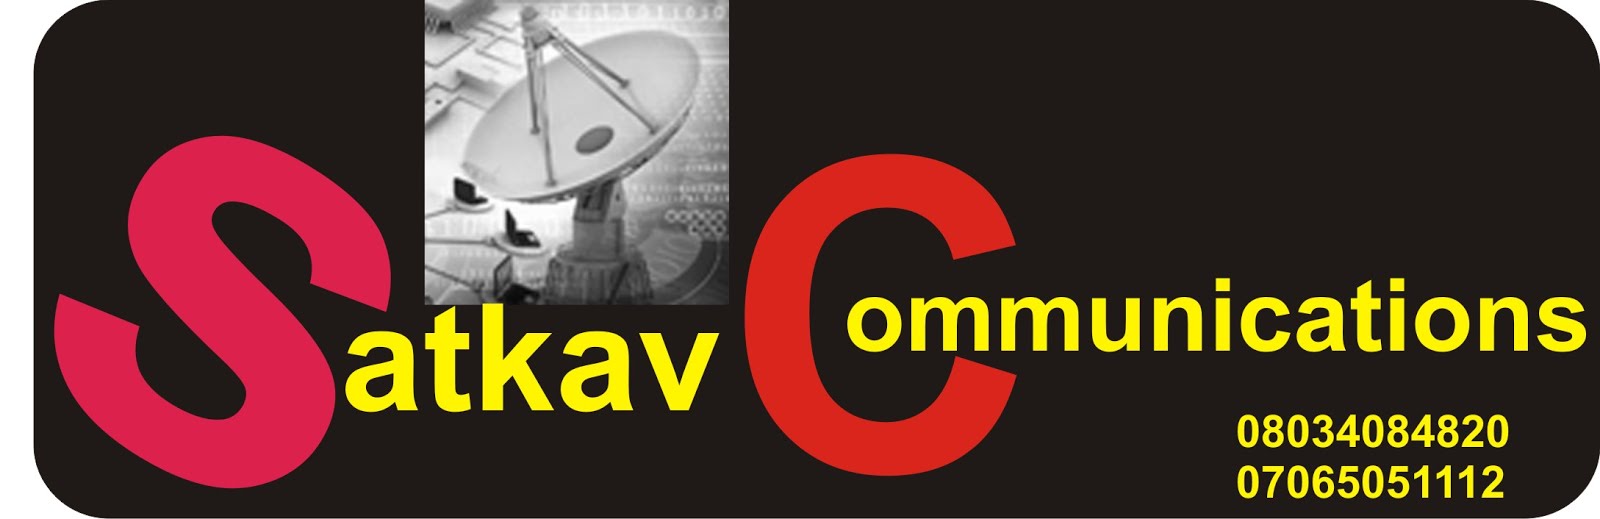 WELCOME TO SATKAV COMMUNICATIONS